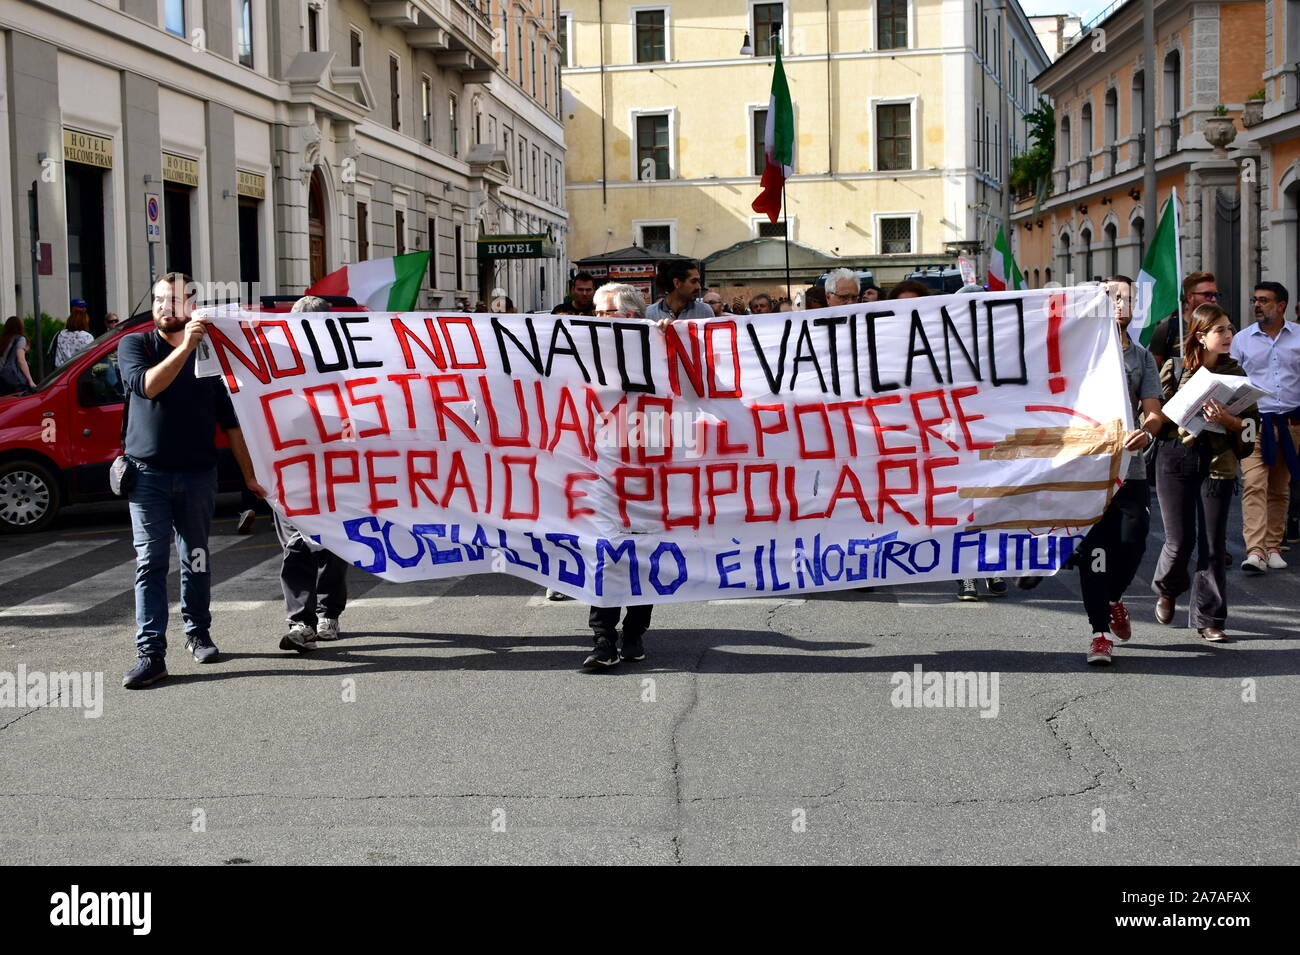 Demonstrators on the streets of Rome against the Euro and the European Union asking for Italexit and waving italian flags. Rome, Italy. Oct. 12, 2019. Stock Photo